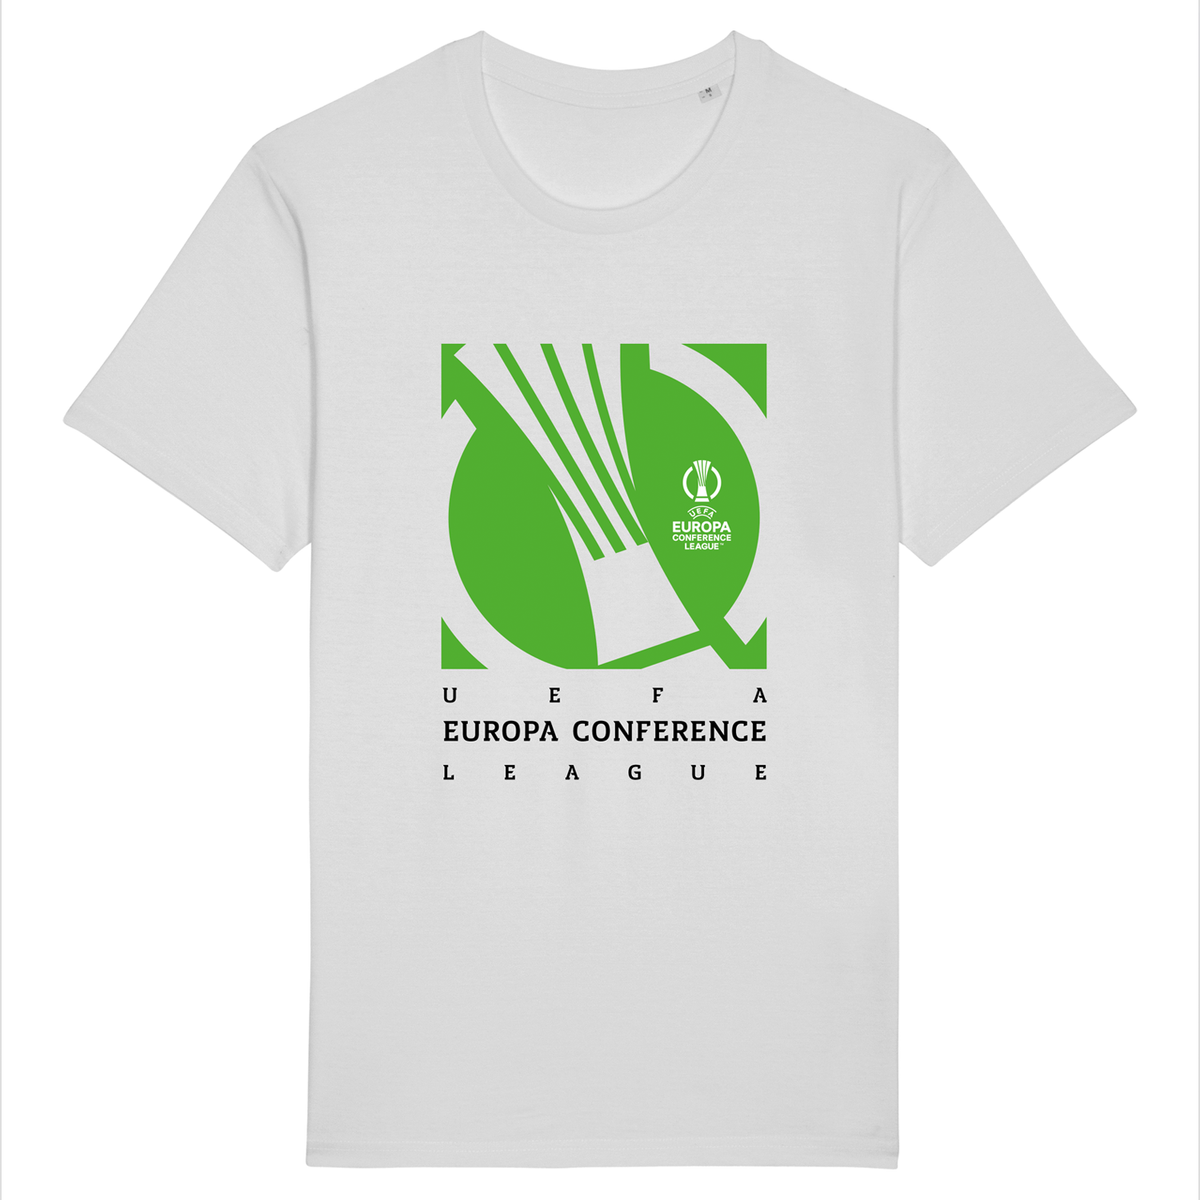 UEFA Europa Conference League - Slanted Badge White T-Shirt UEFA Club Competitions Online Store